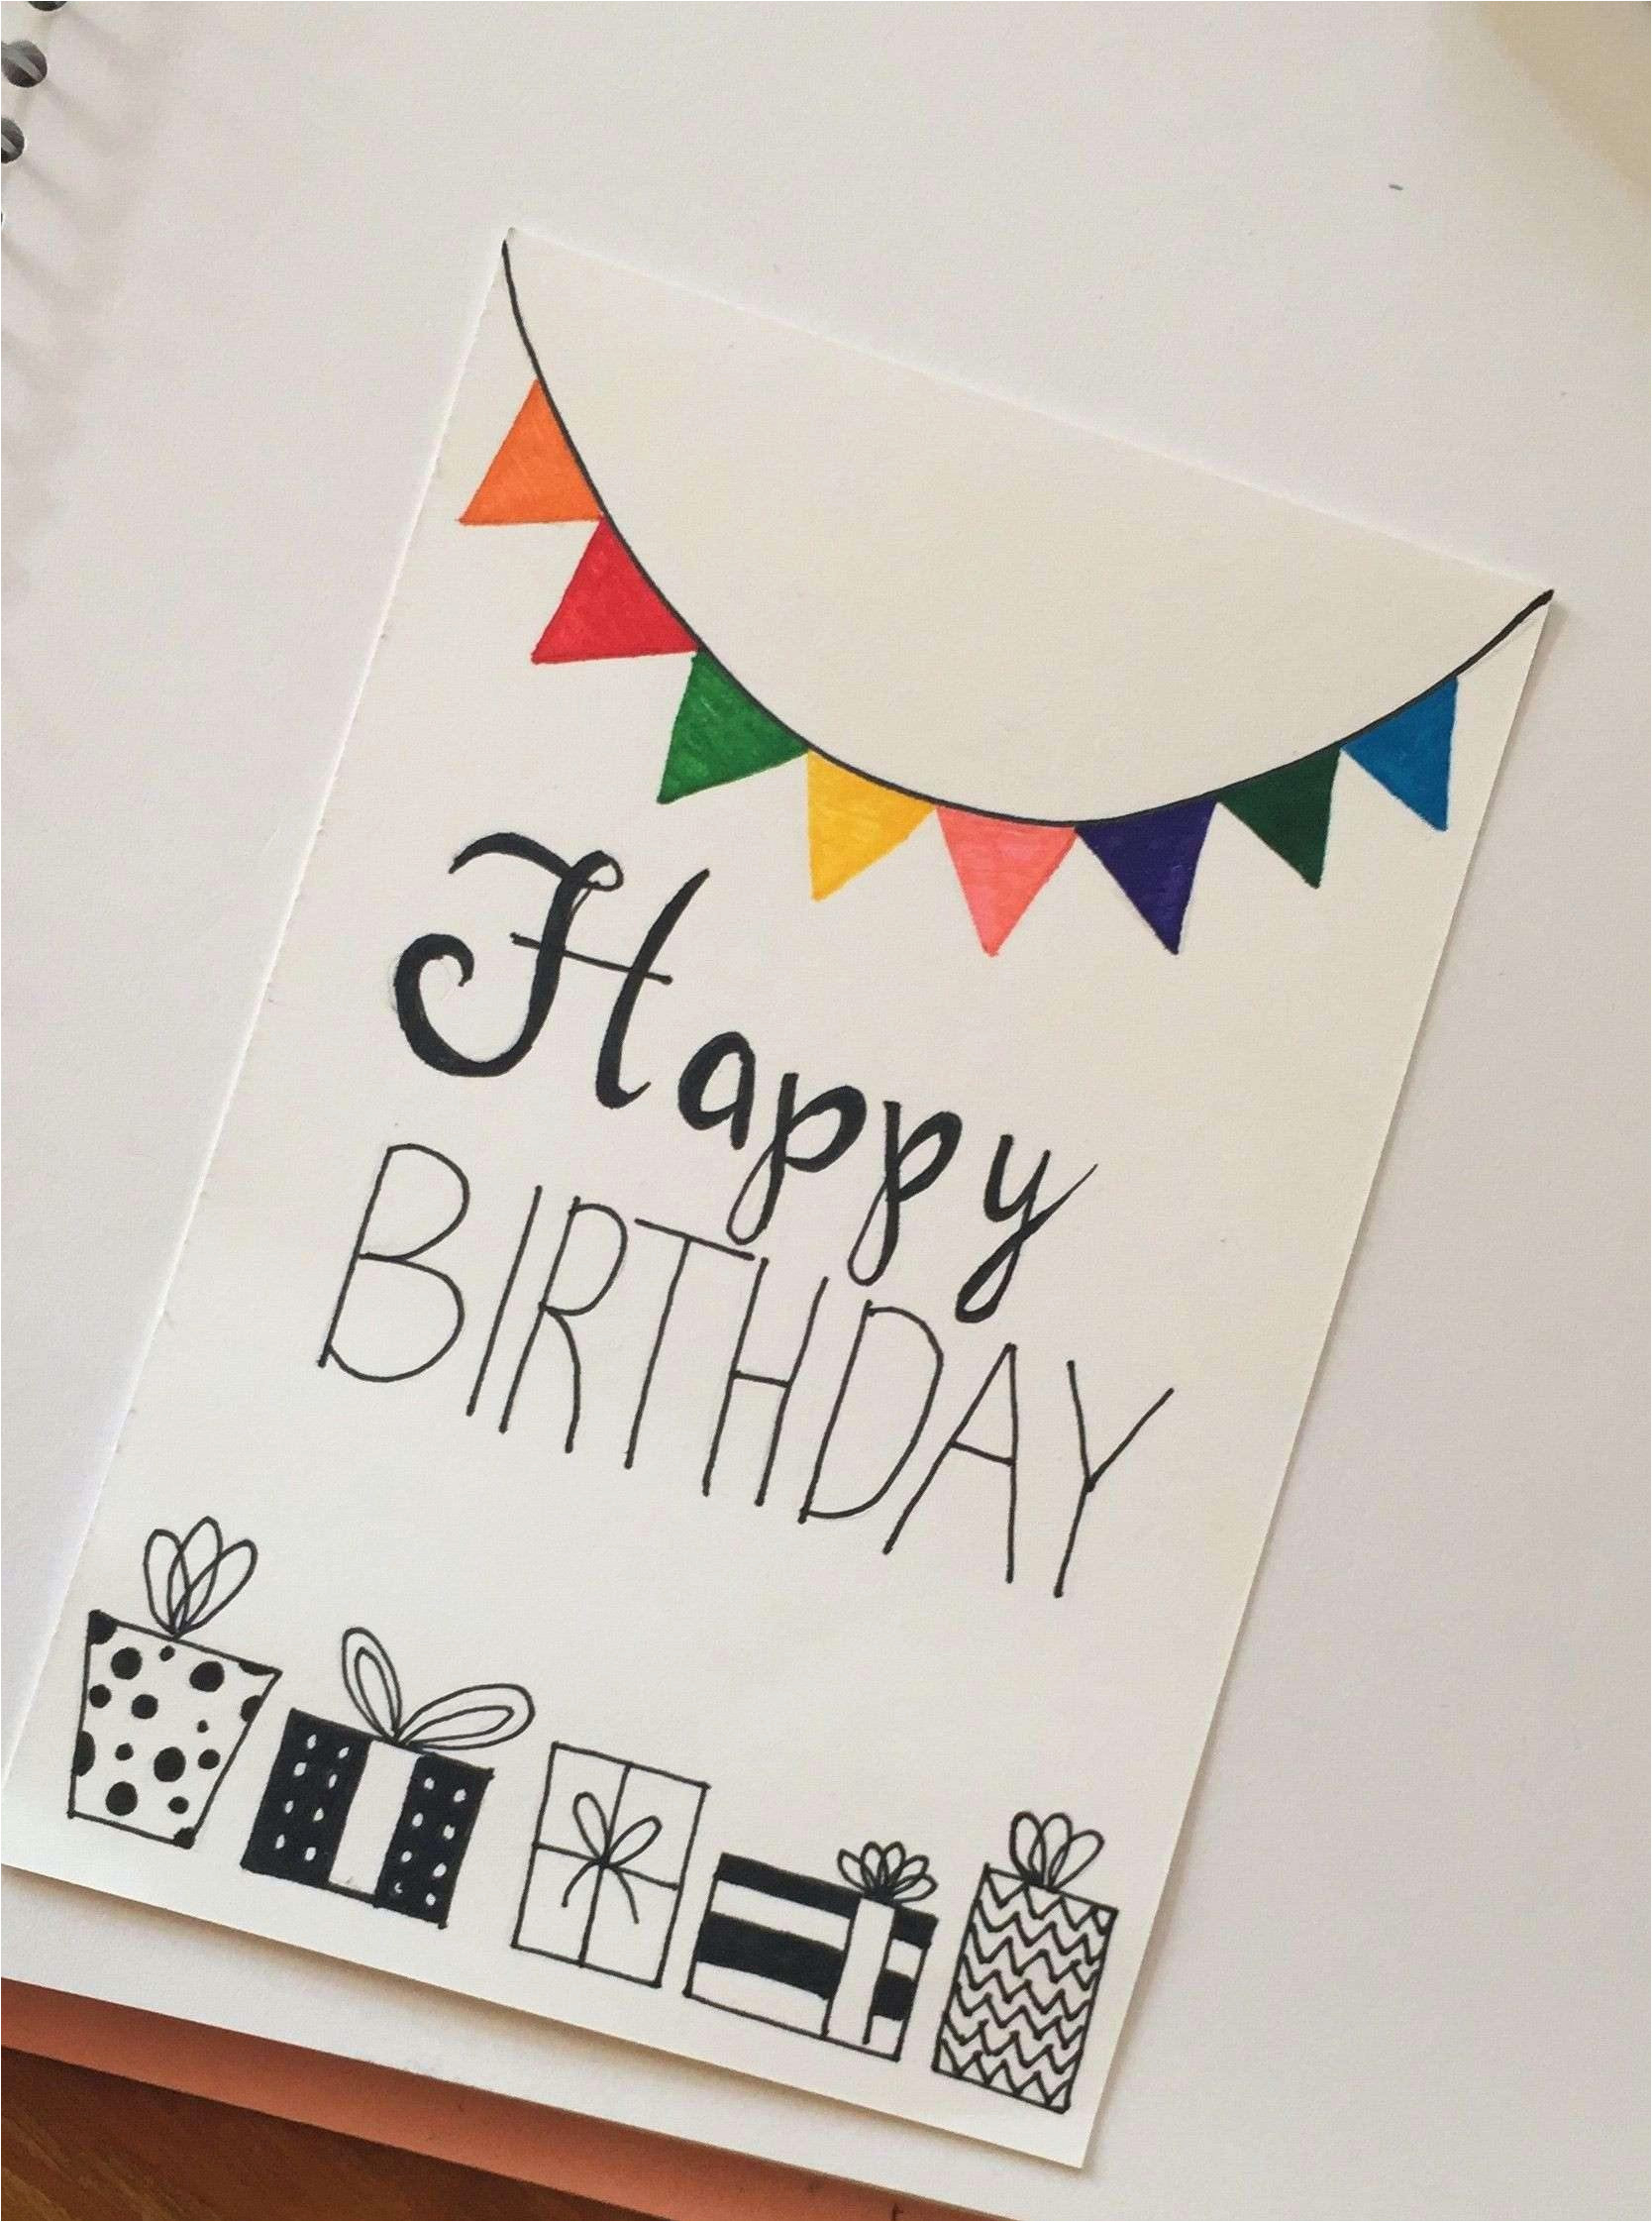 Homemade Birthday Cards For Dad Ideas Diy Birthday Cards For Nana 911stories